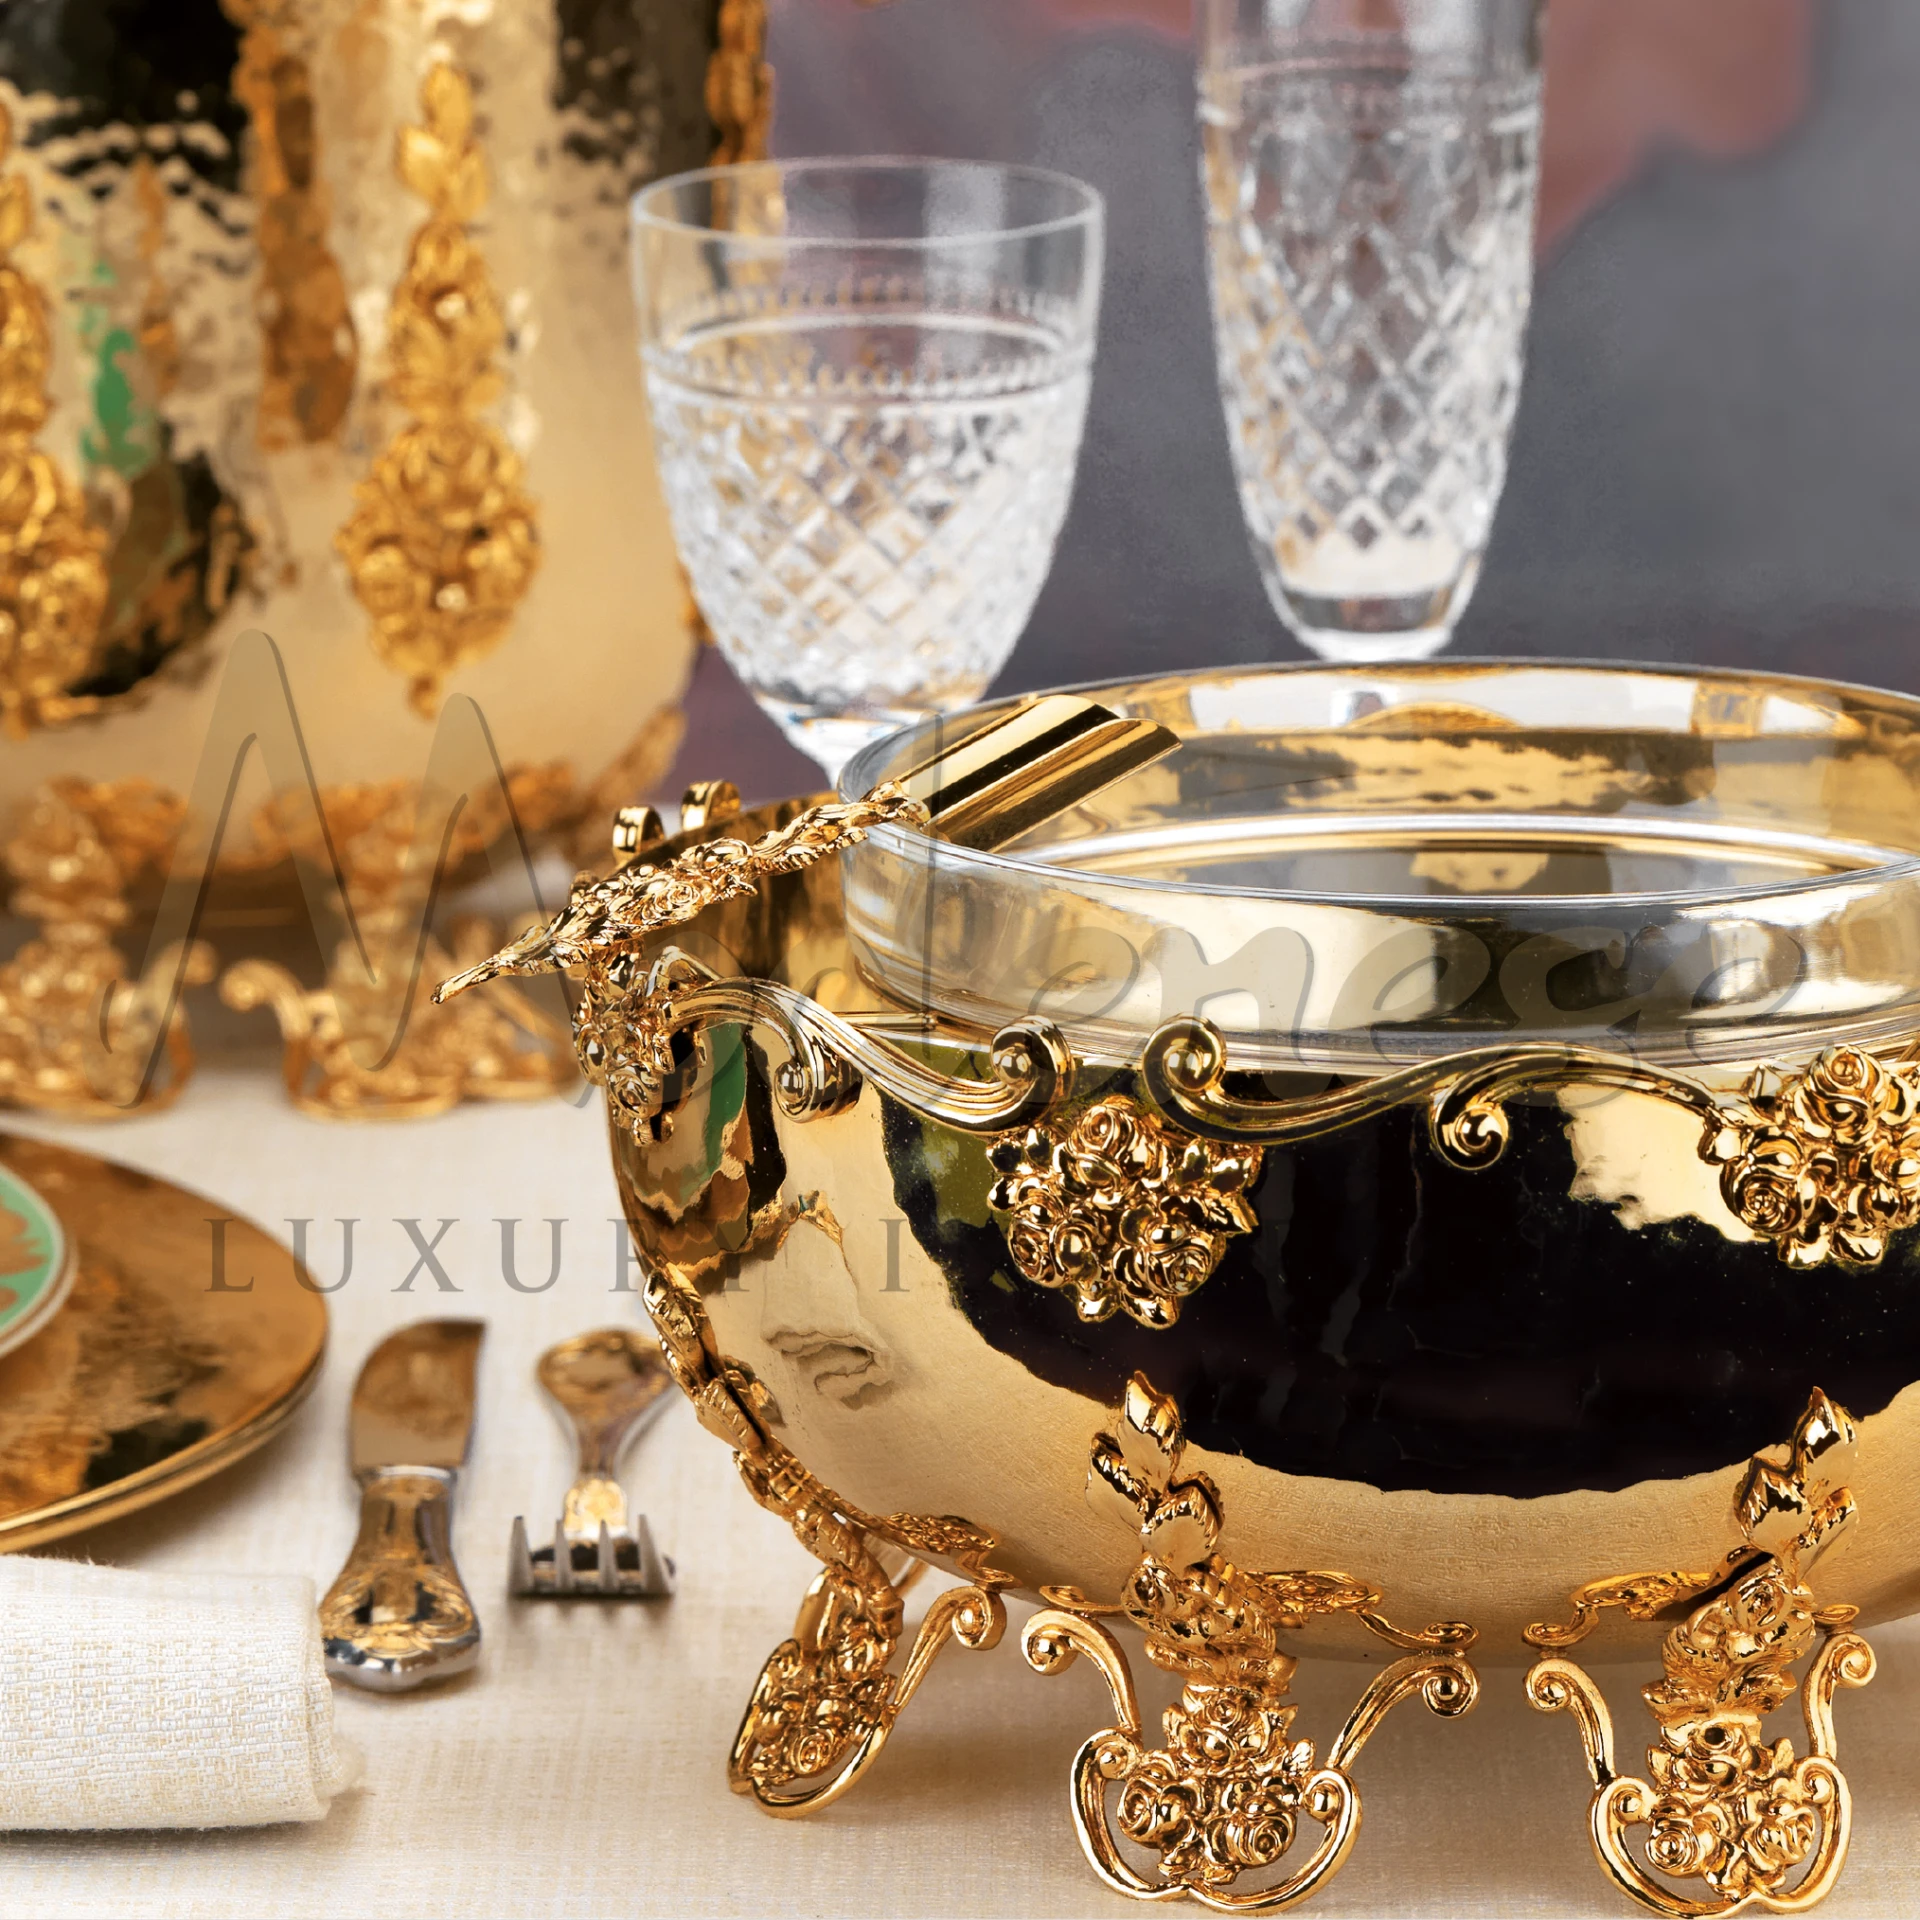 A gold Caviar holder with spoon on a table next to glasses and utensils.